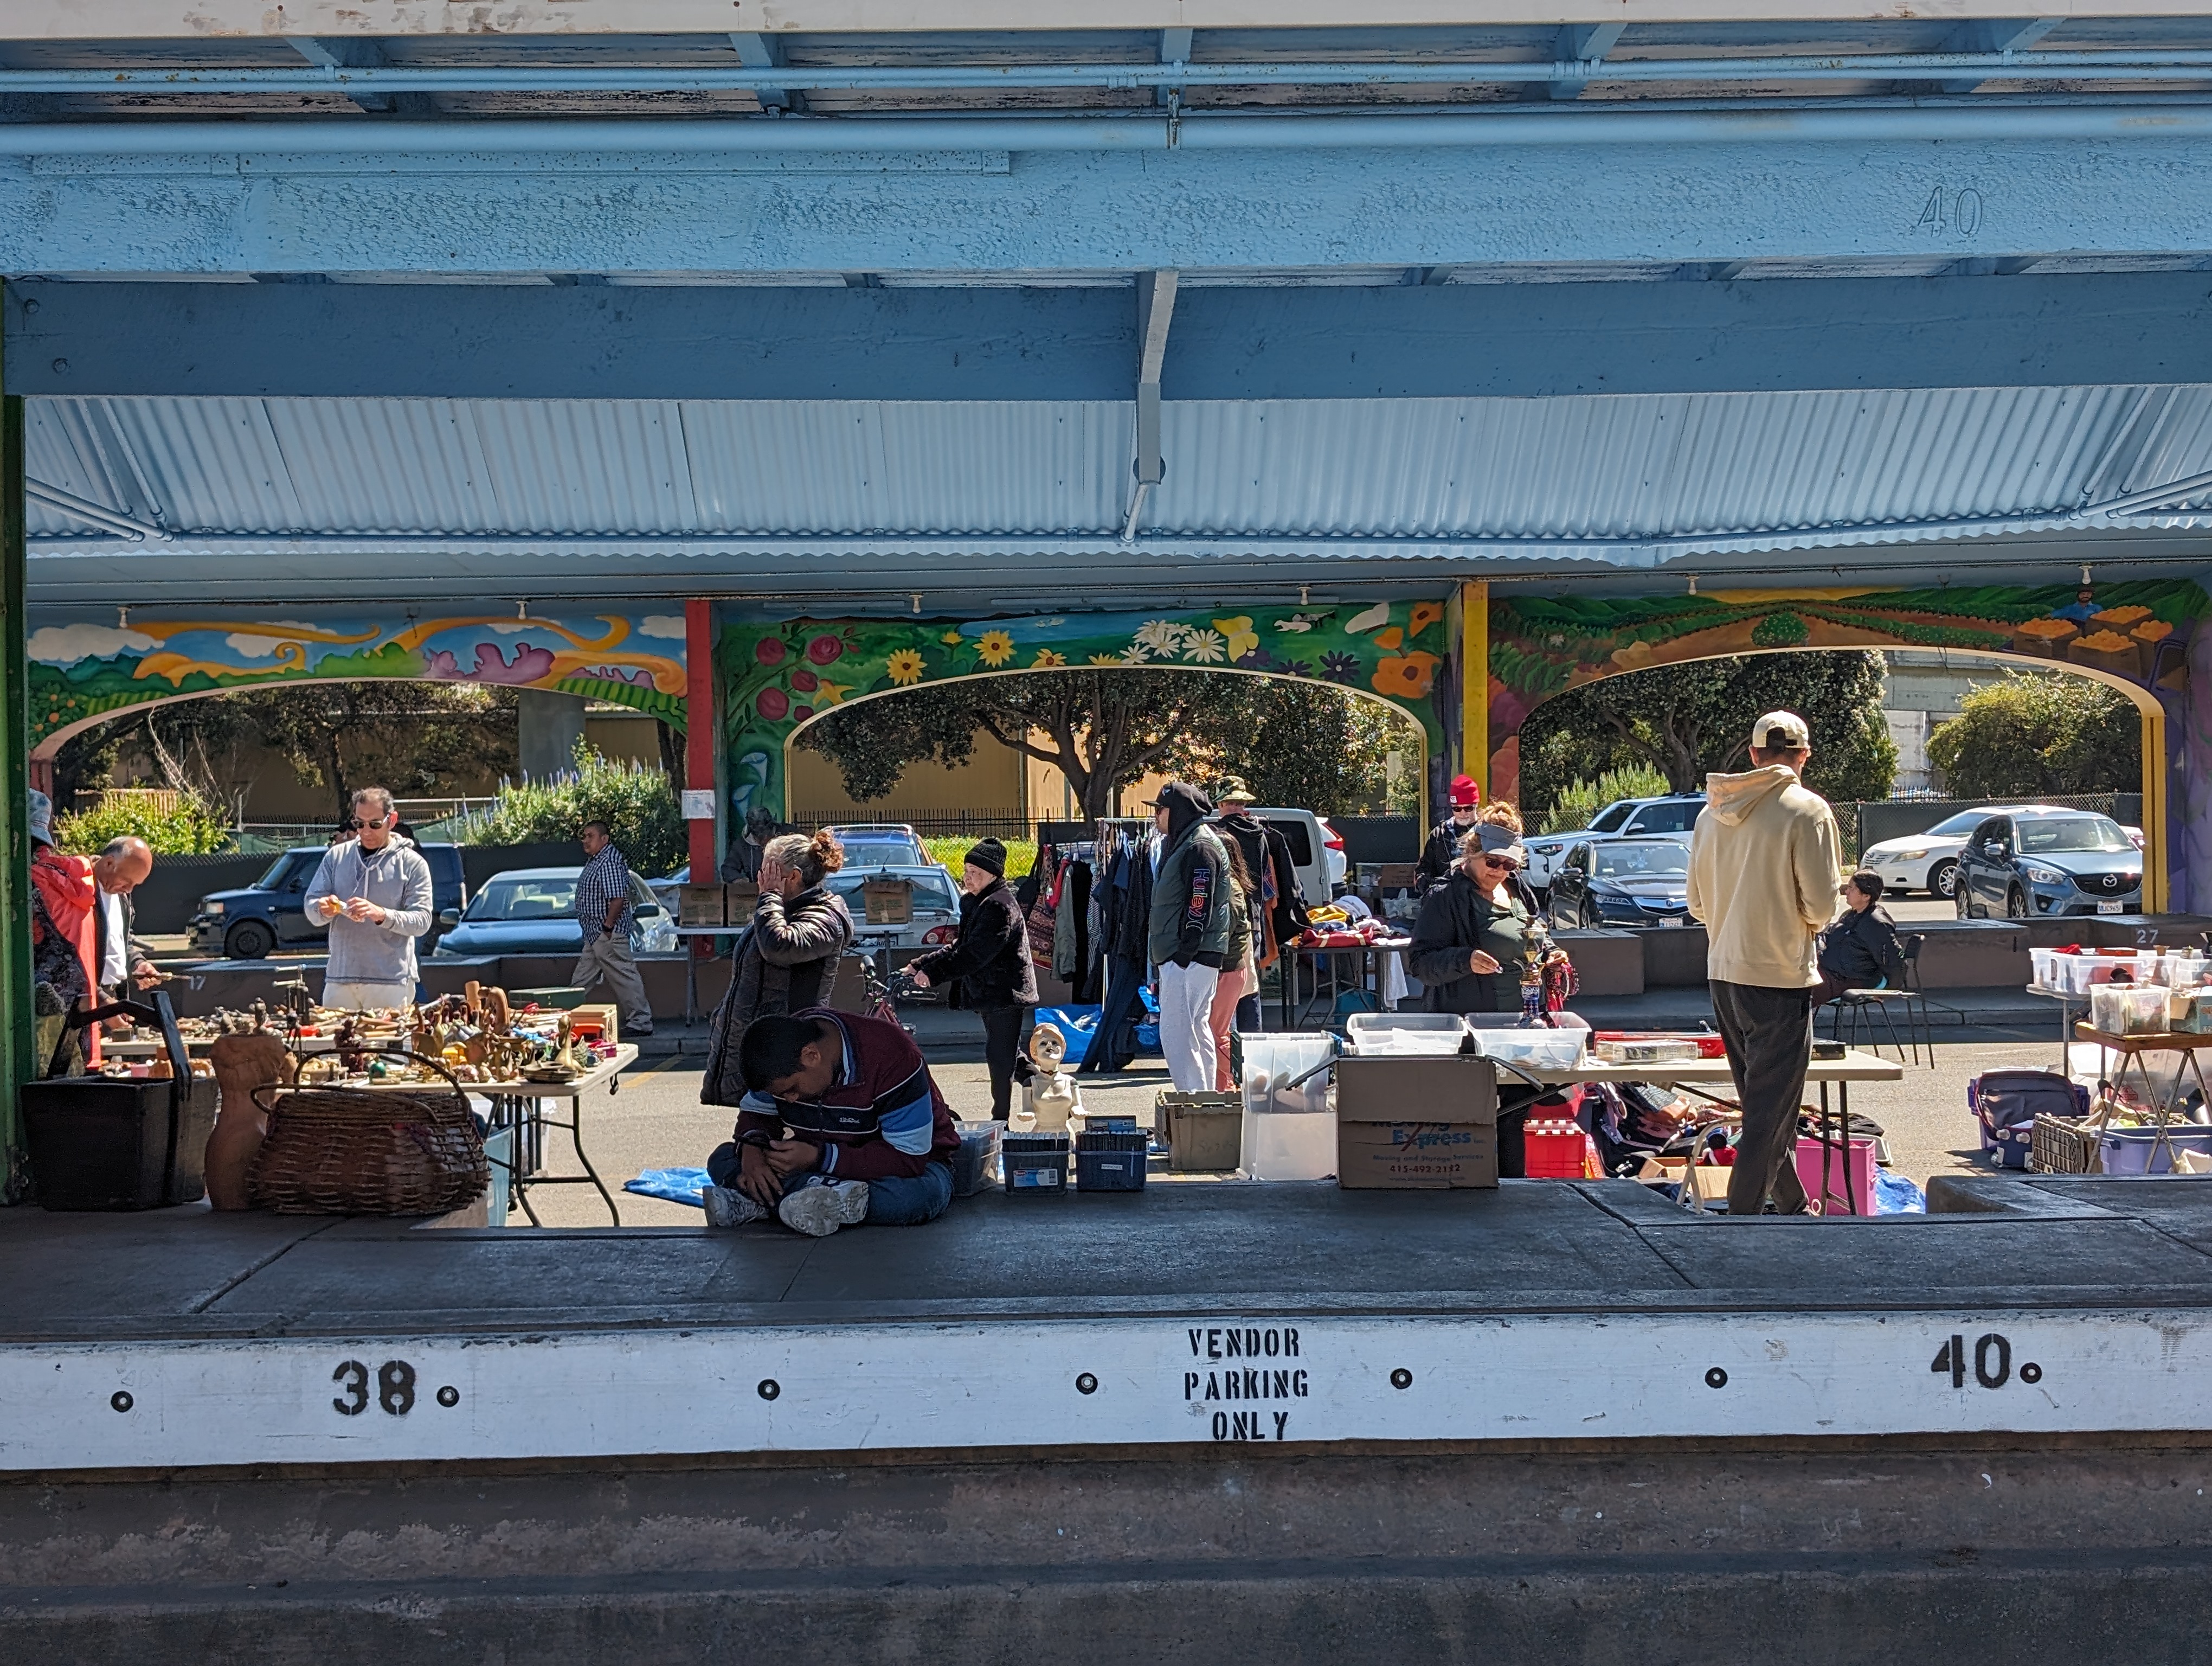 Vendors at the Alemany Flea Market are optimistic about continuing operations